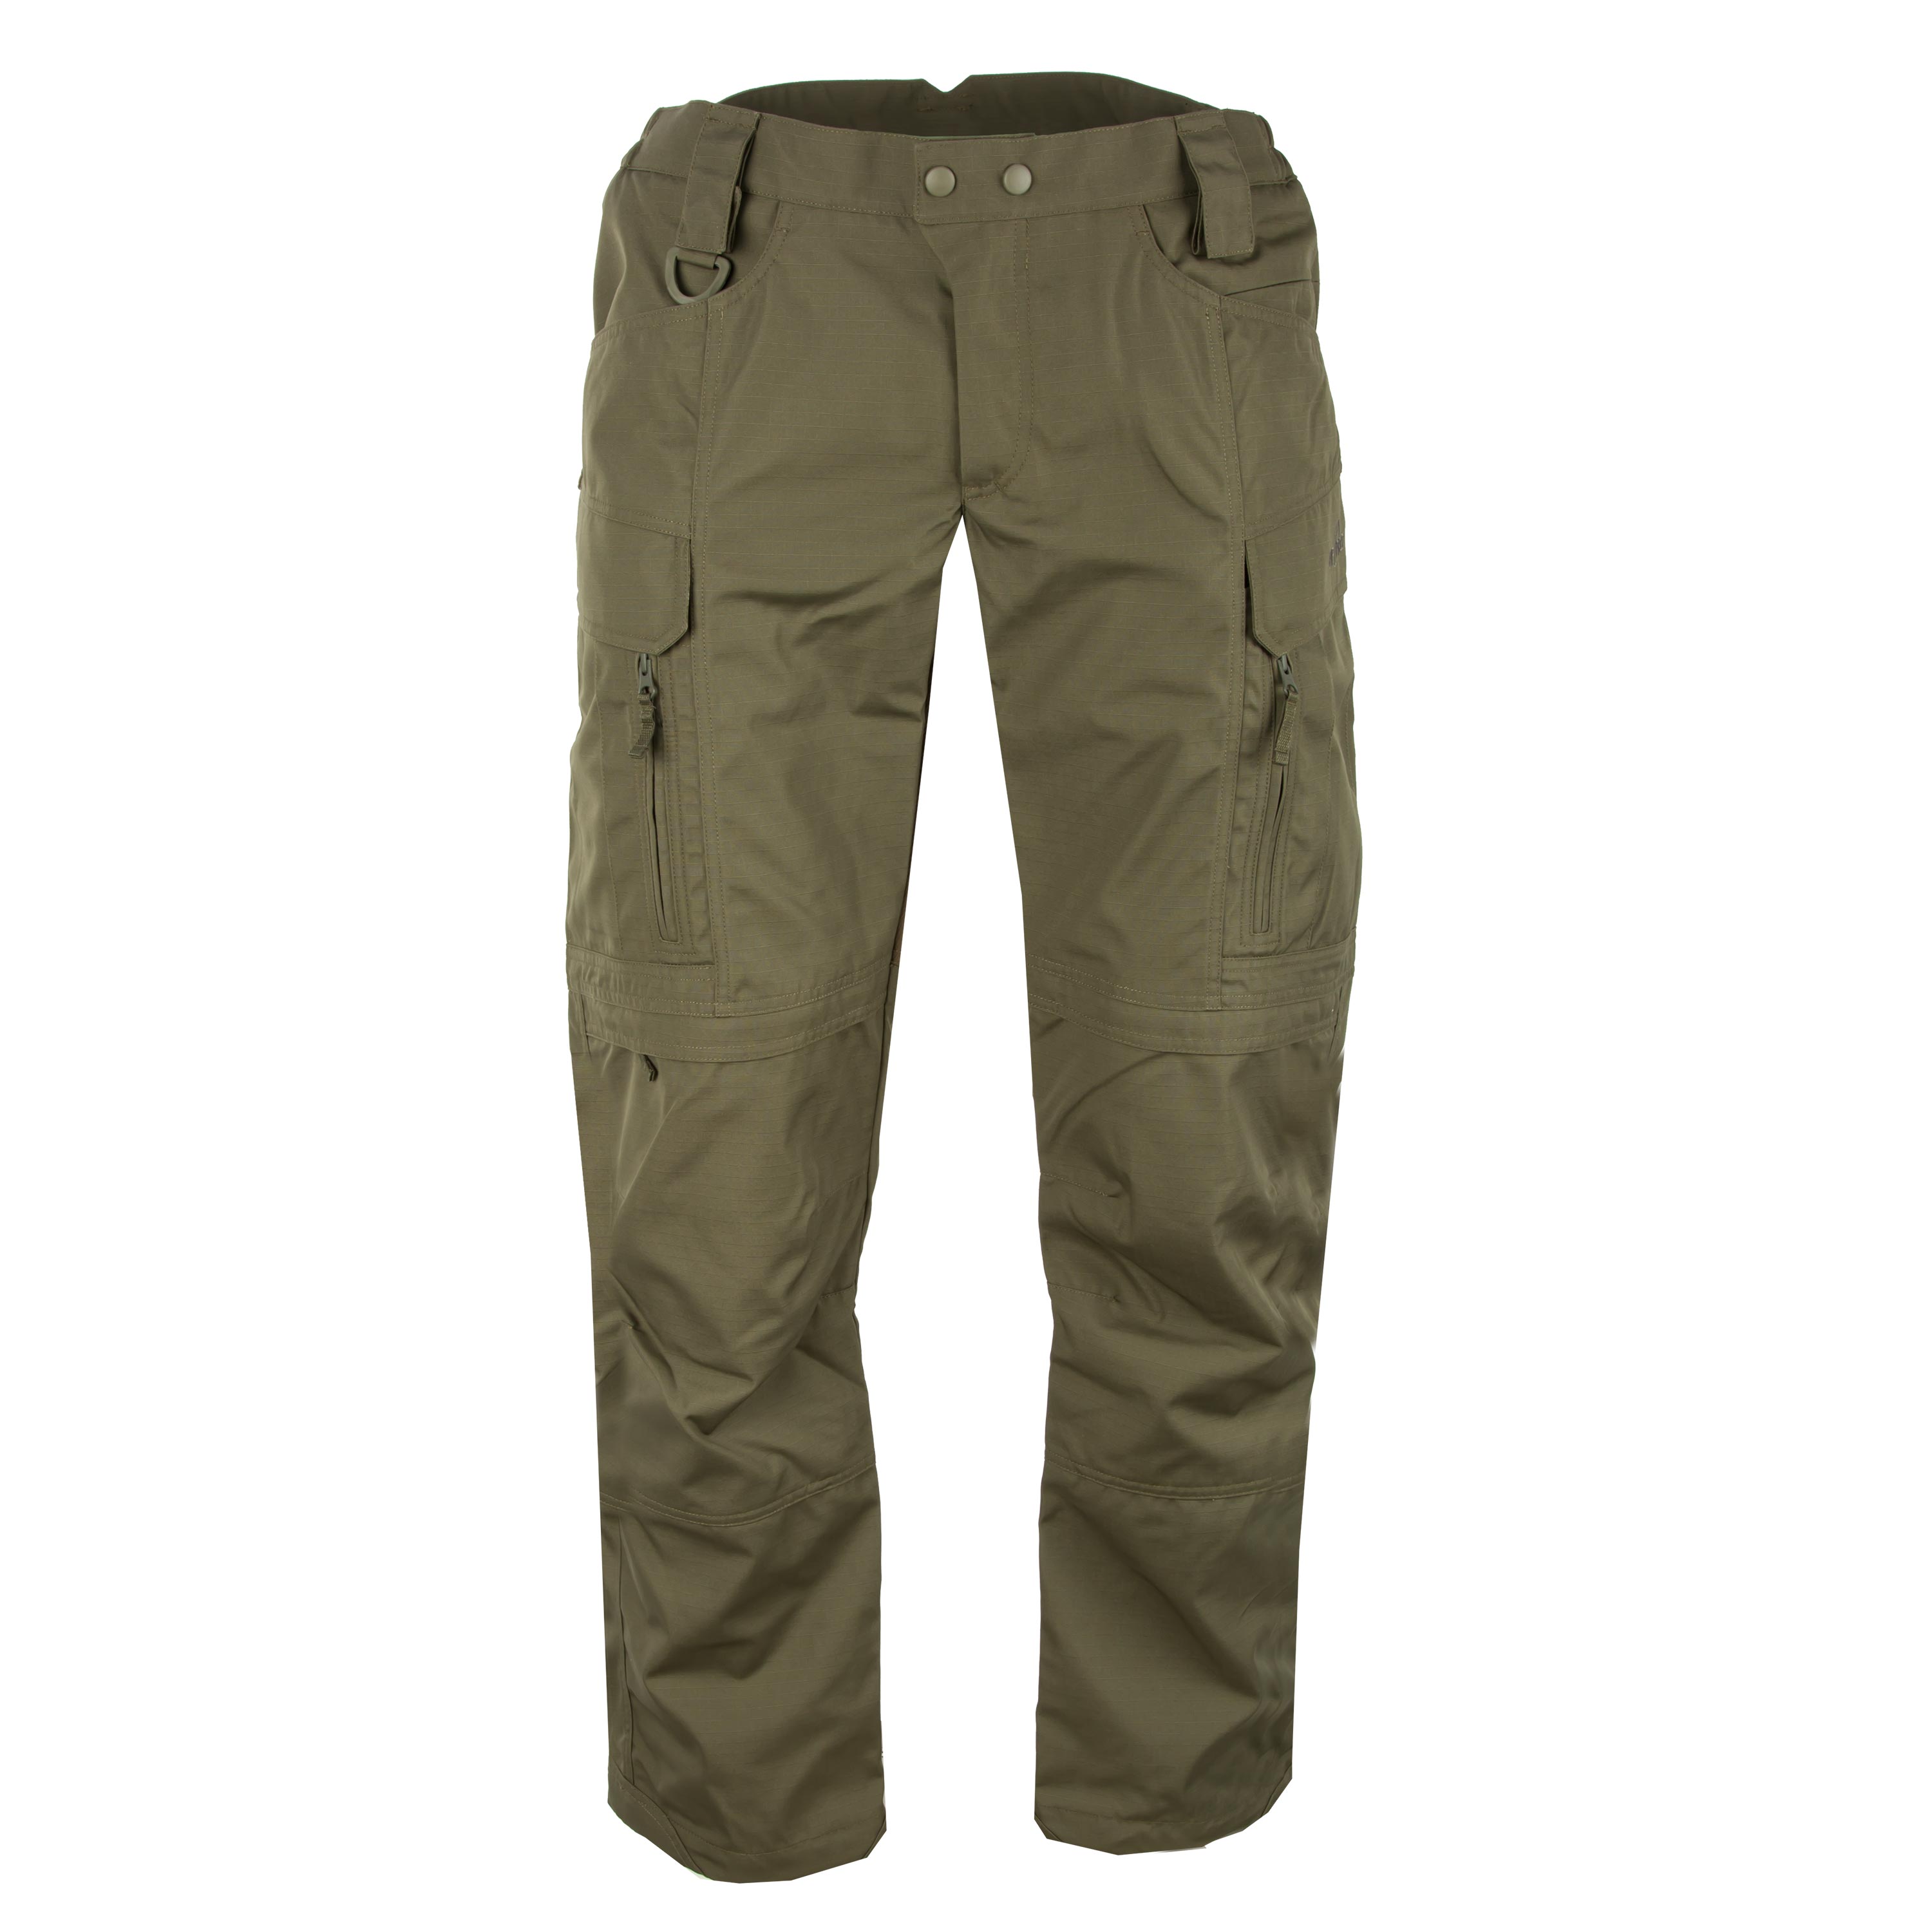 Purchase the UF Pro P-40 Classic Gen. 2 Tactical Pants brown gre